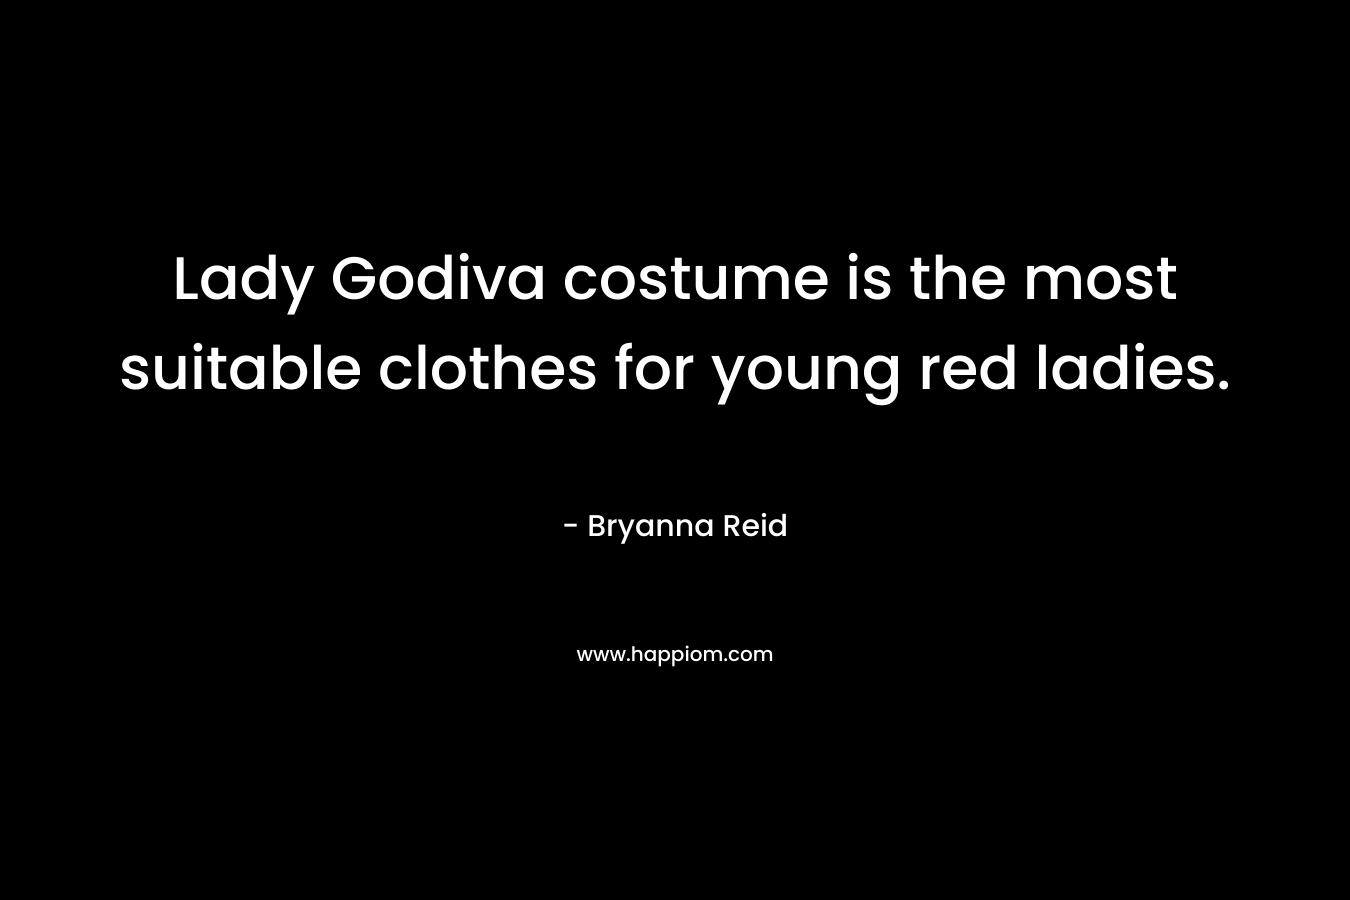 Lady Godiva costume is the most suitable clothes for young red ladies. – Bryanna Reid